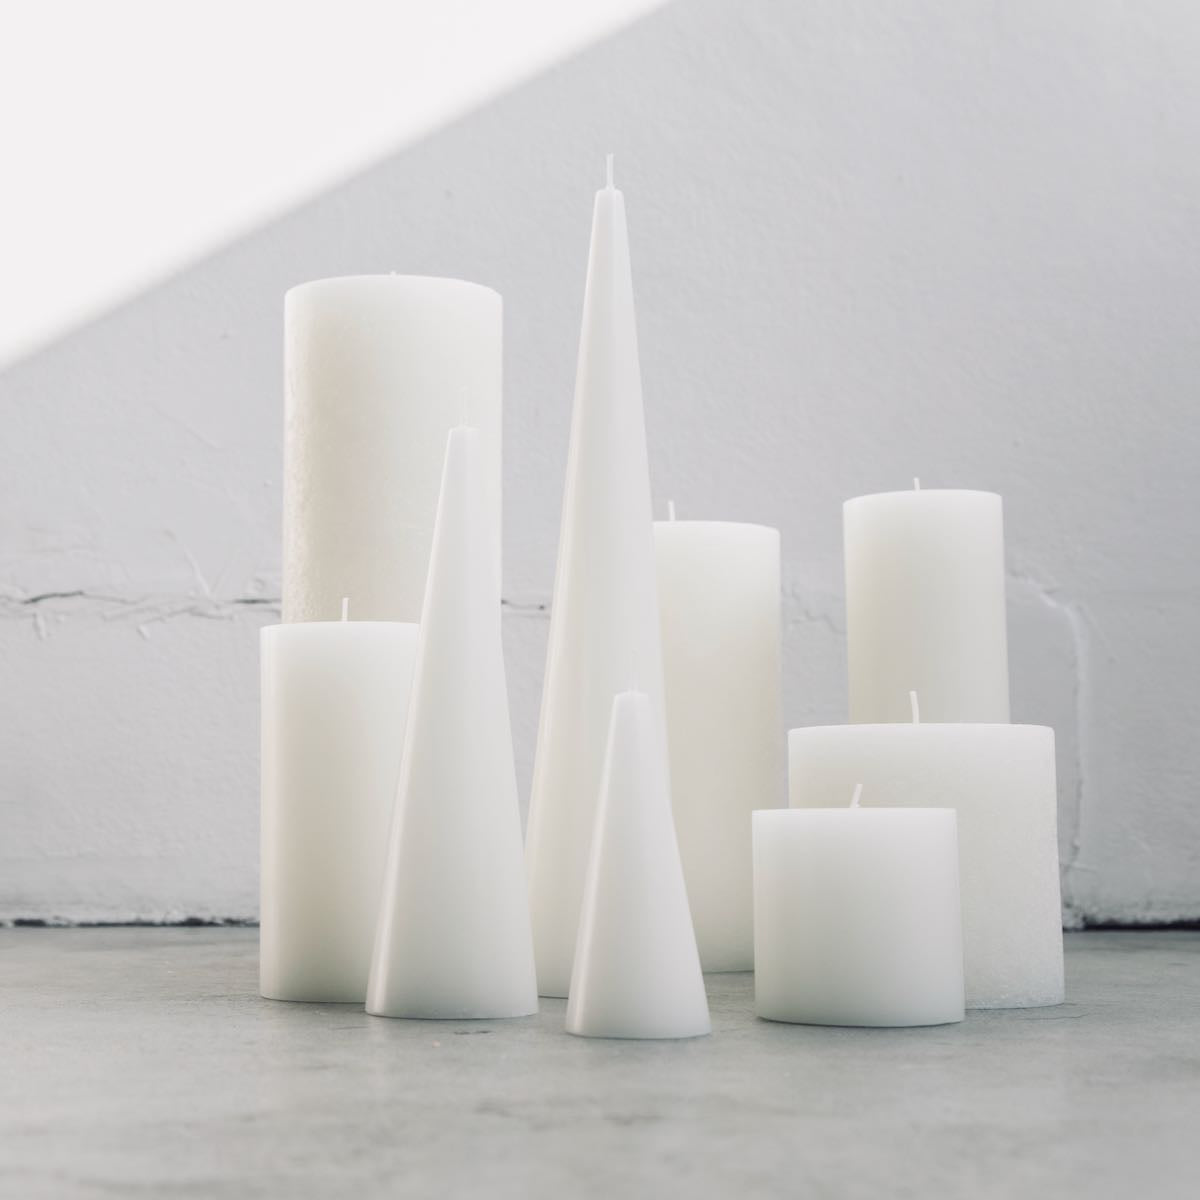 Cluster of warm white candles